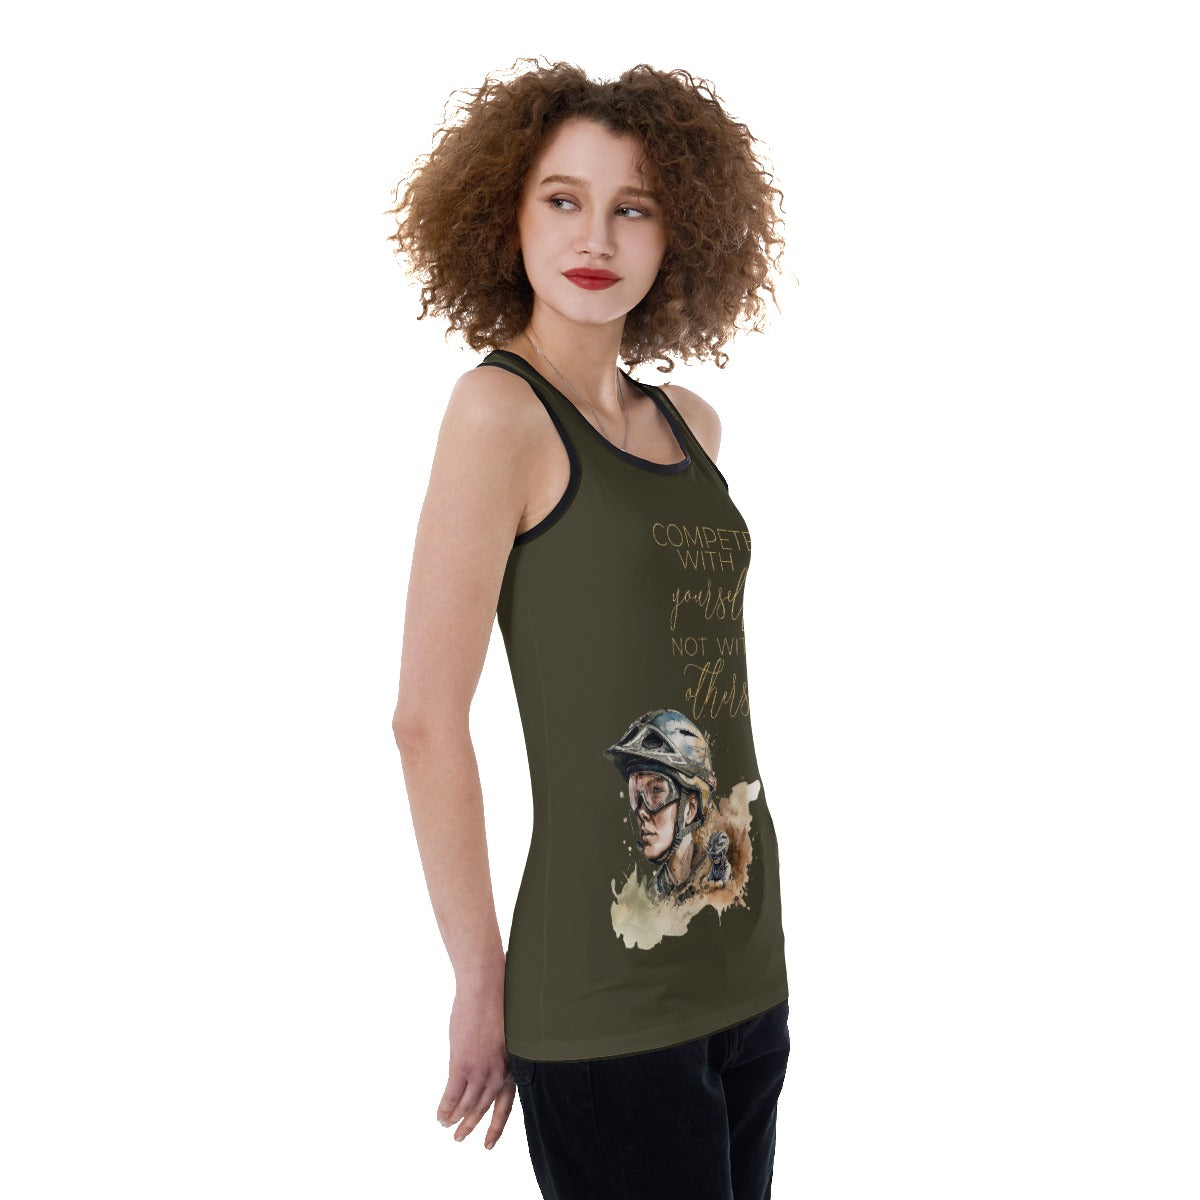 All-Over Print Women's Back Hollow Tank Top